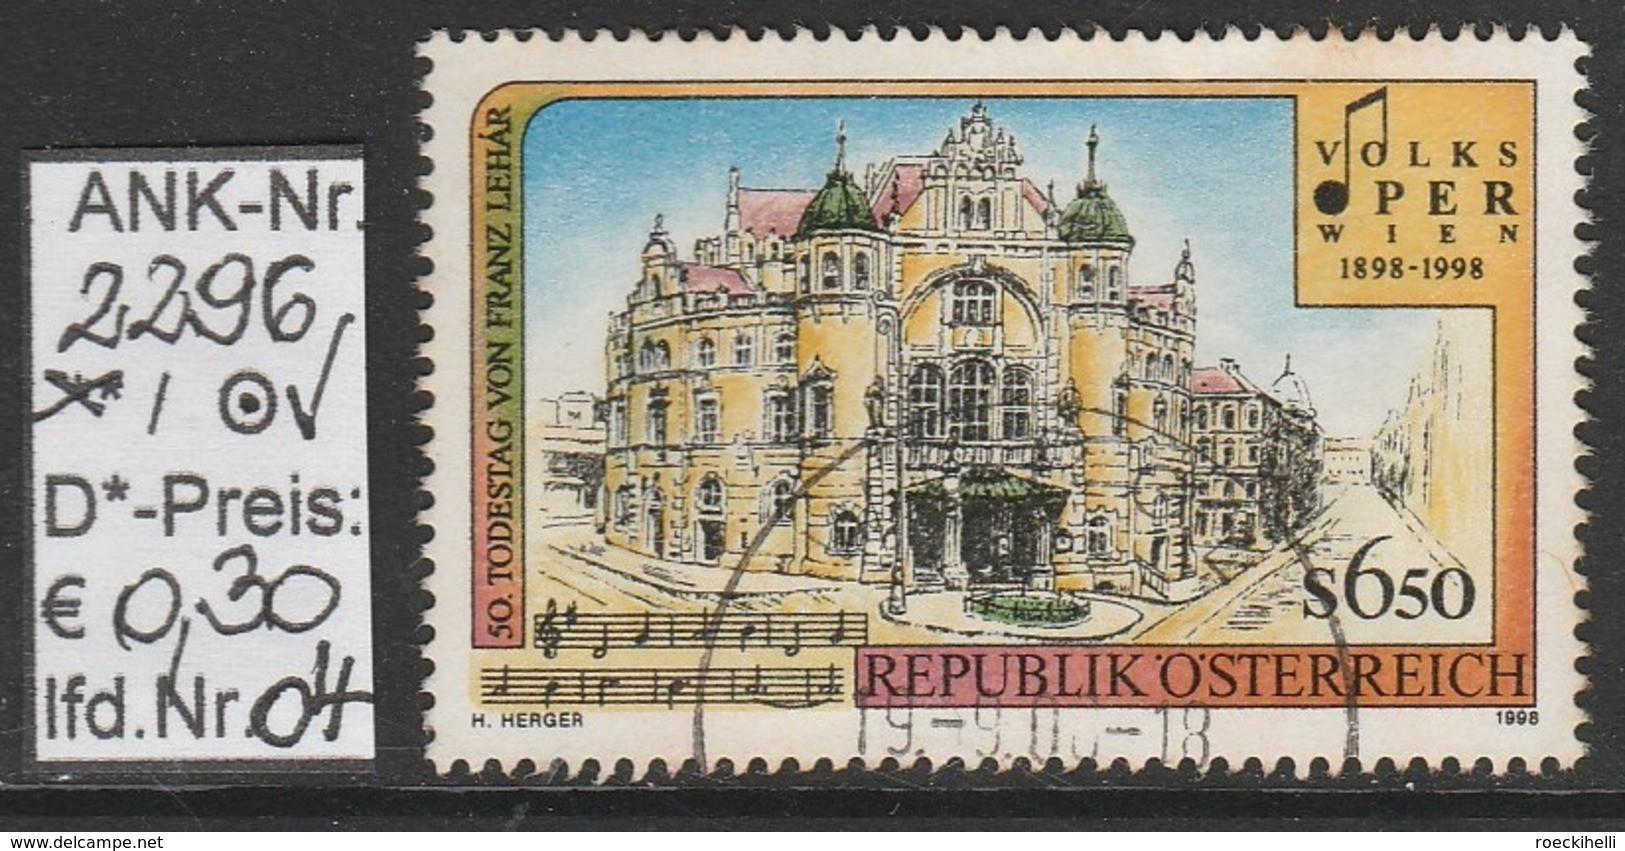 19.9.1998 - SM "100 Jahre Wr.Volksoper...."  - O Gestempelt  - Siehe Scan  (2296o 01-02,04-14,17) - Used Stamps